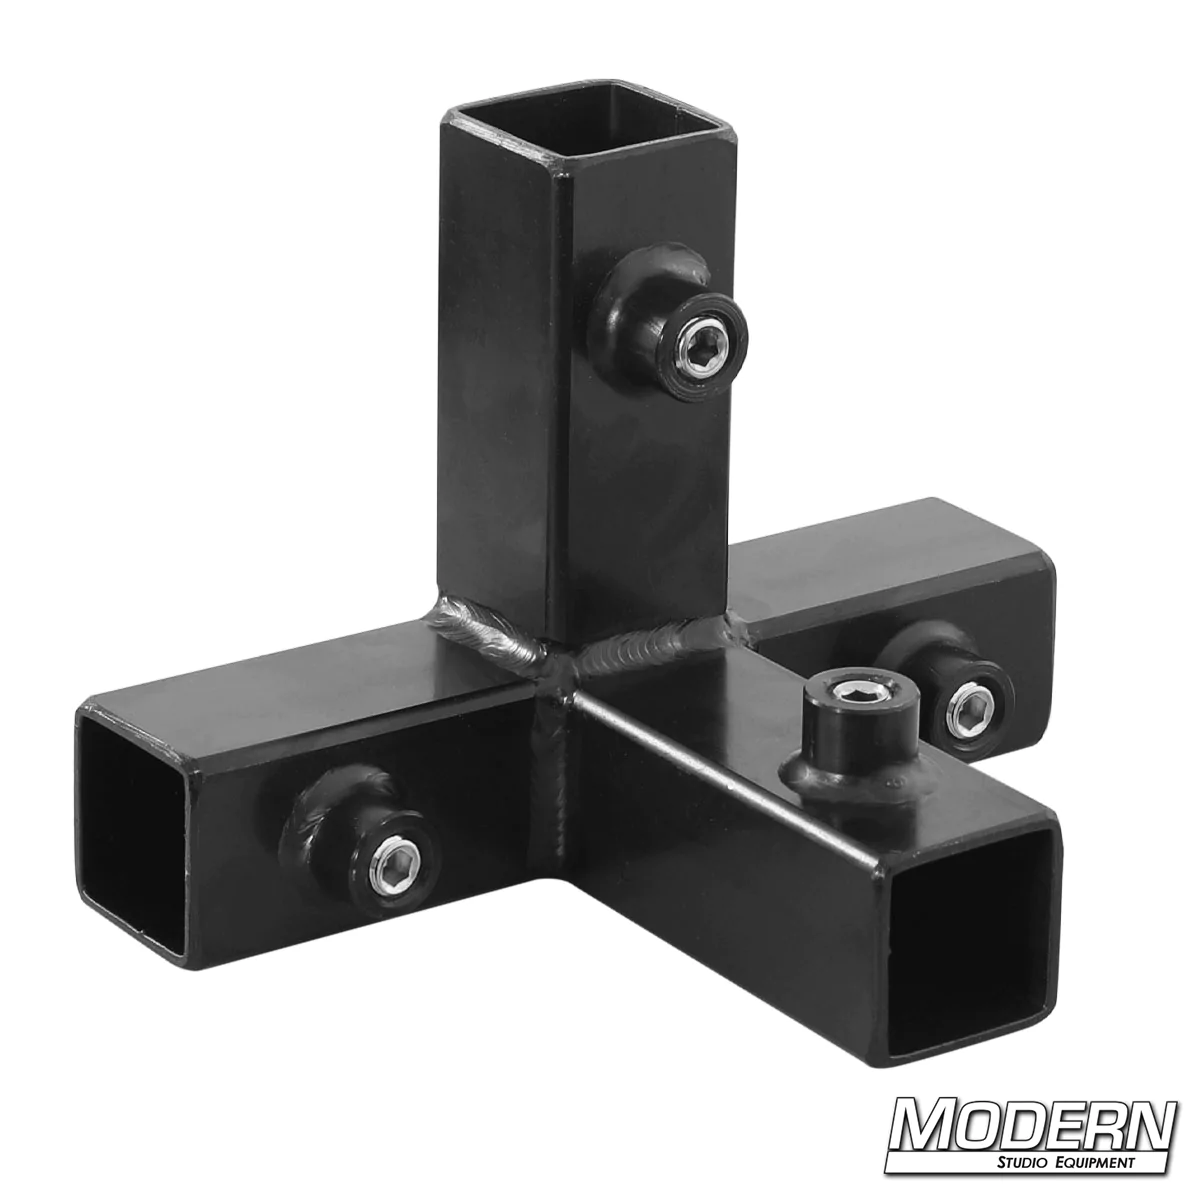 Tee with Brace for 1-inch Square Tube - Black Zinc